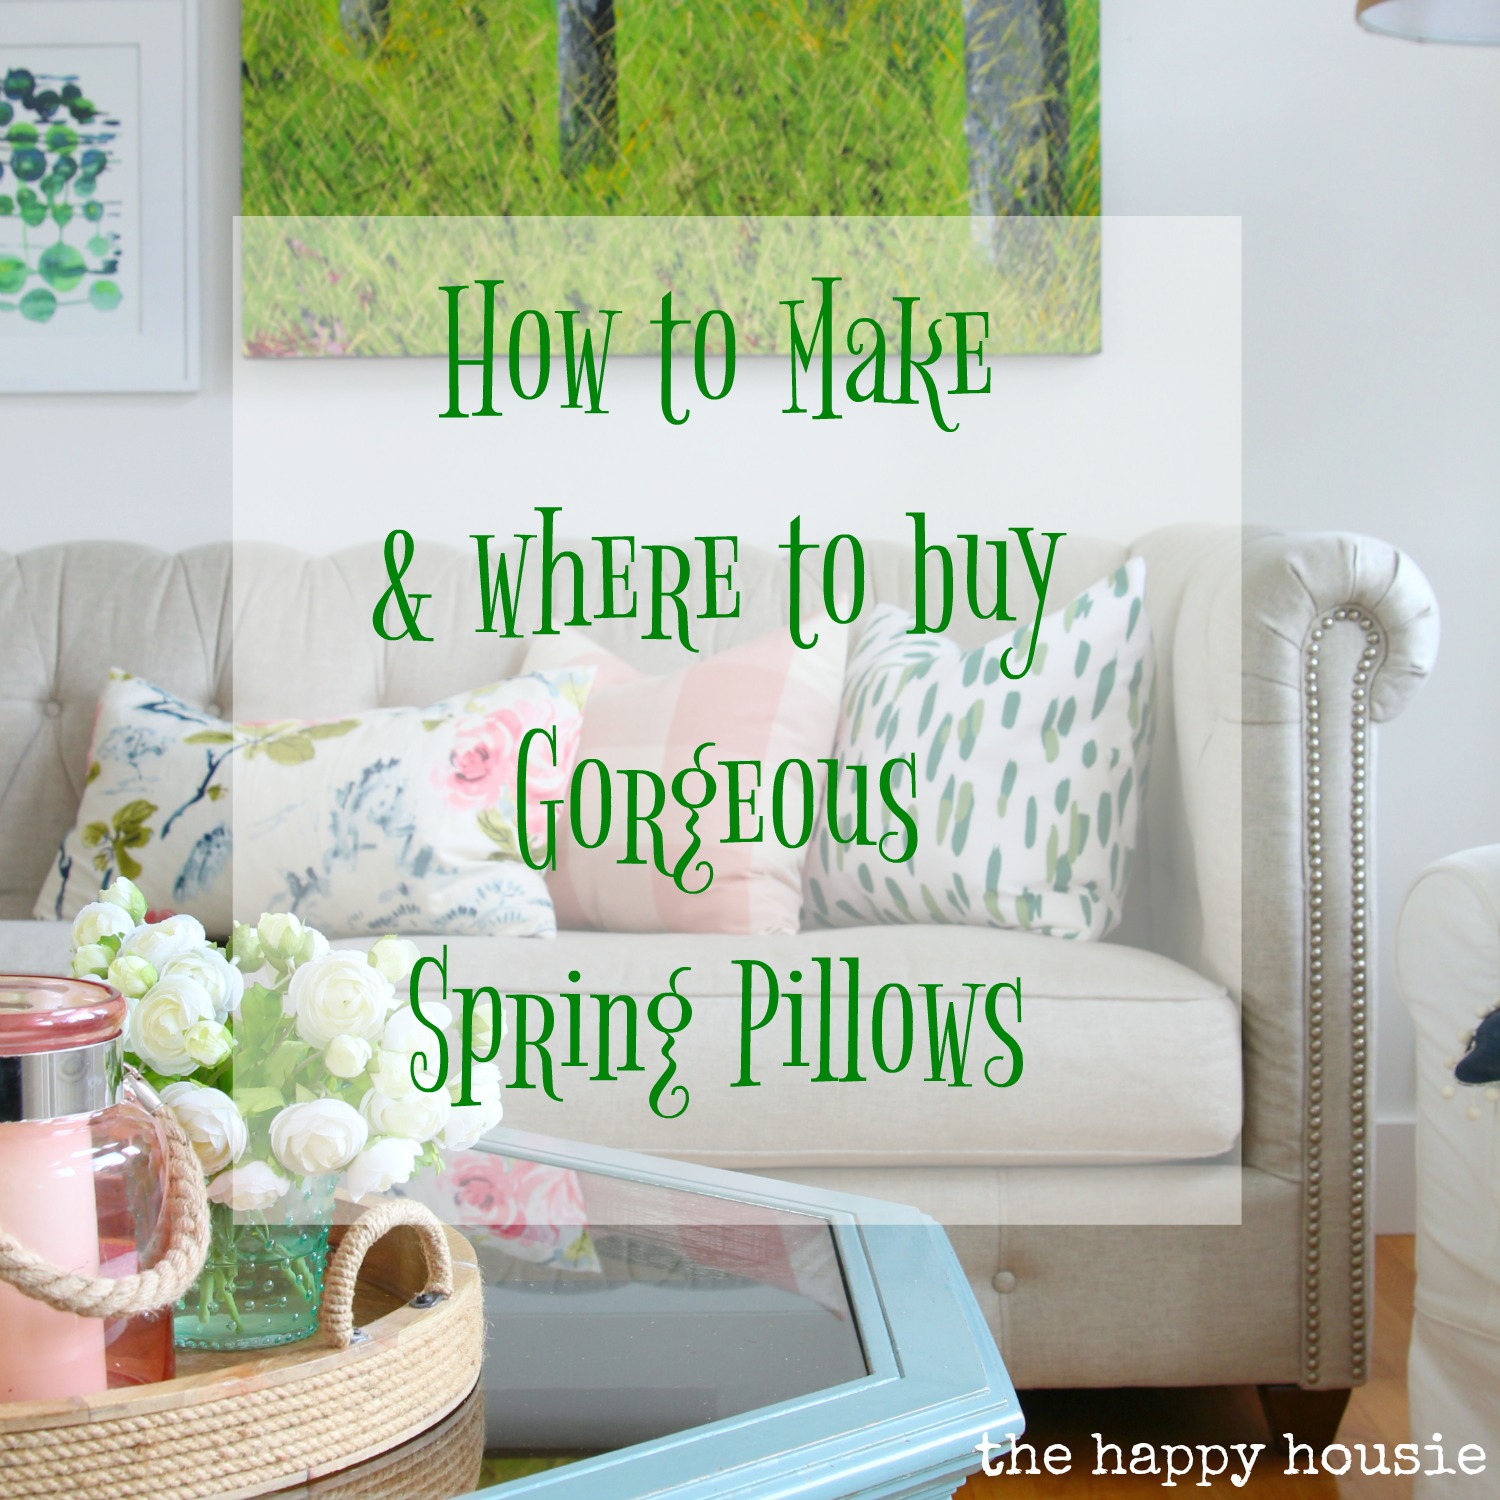 How To Make And Where To Buy Gorgeous Spring Pillows graphic.